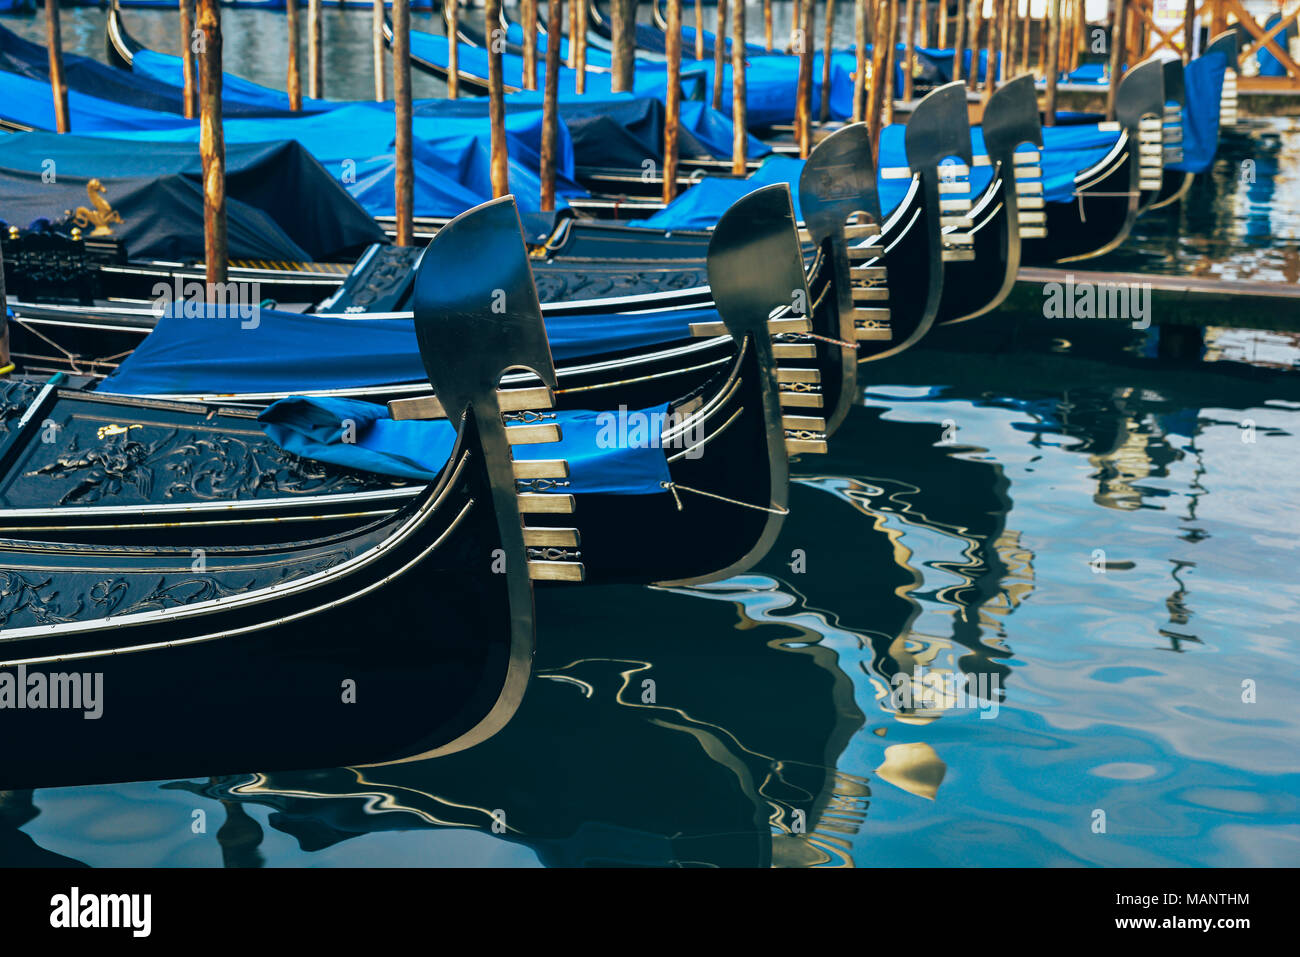 Rows of gondolas on a canal in Venice, Italy Stock Photo